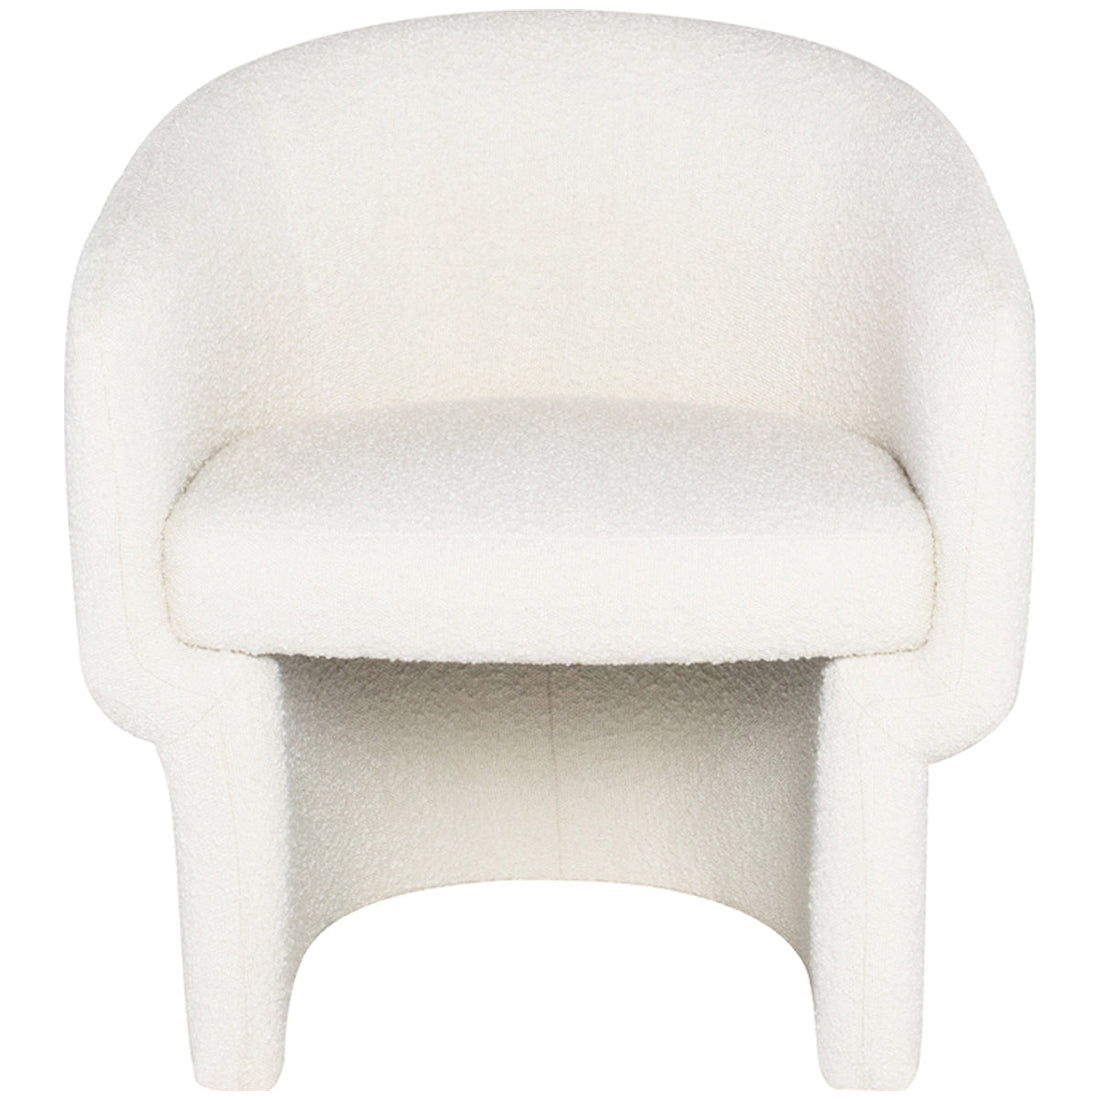 Nuevo Living Clementine Occasional Chair